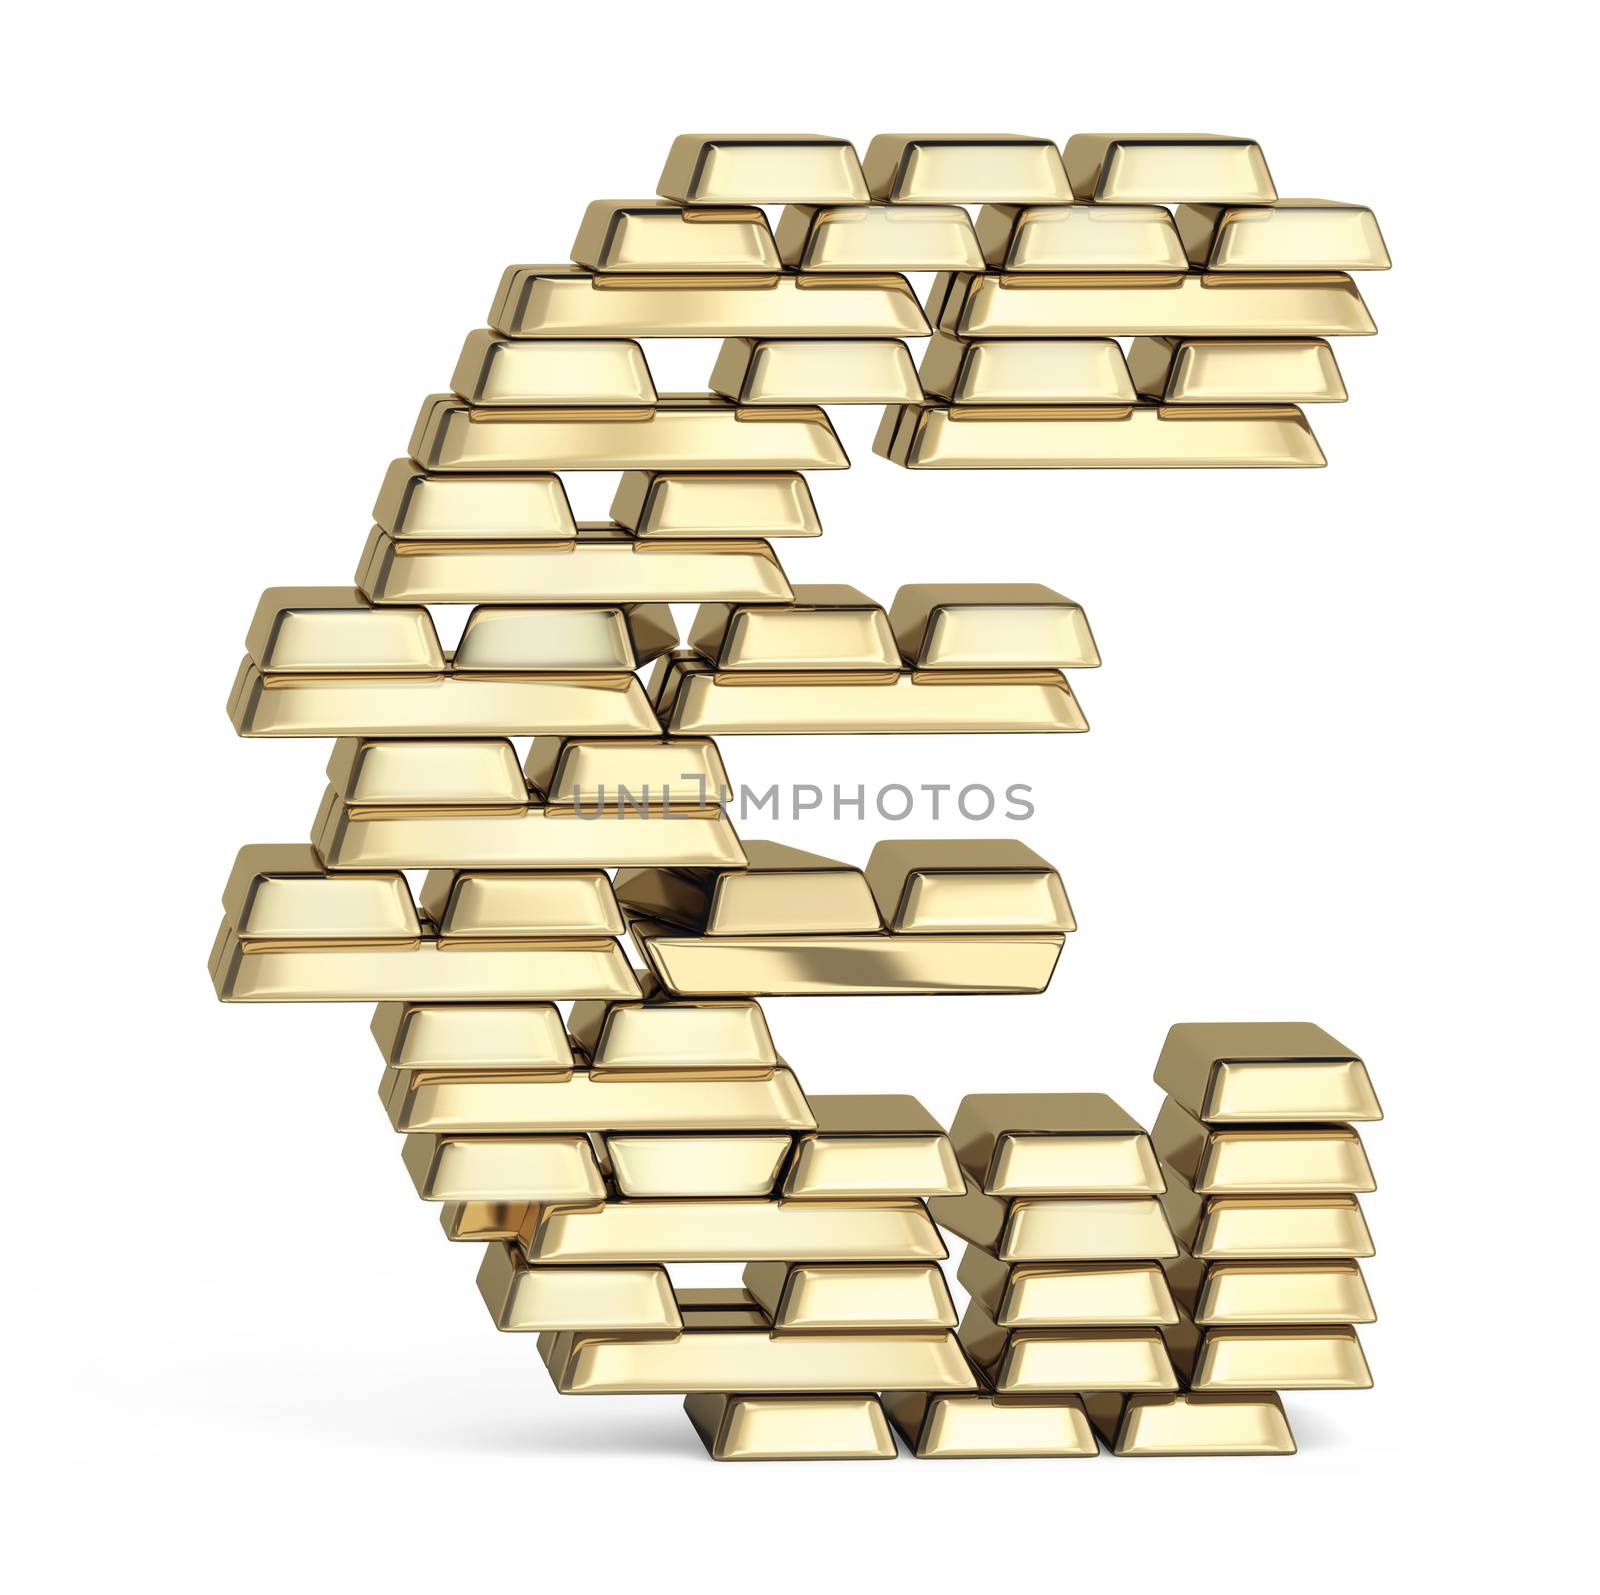 Euro sign from gold bars by iunewind